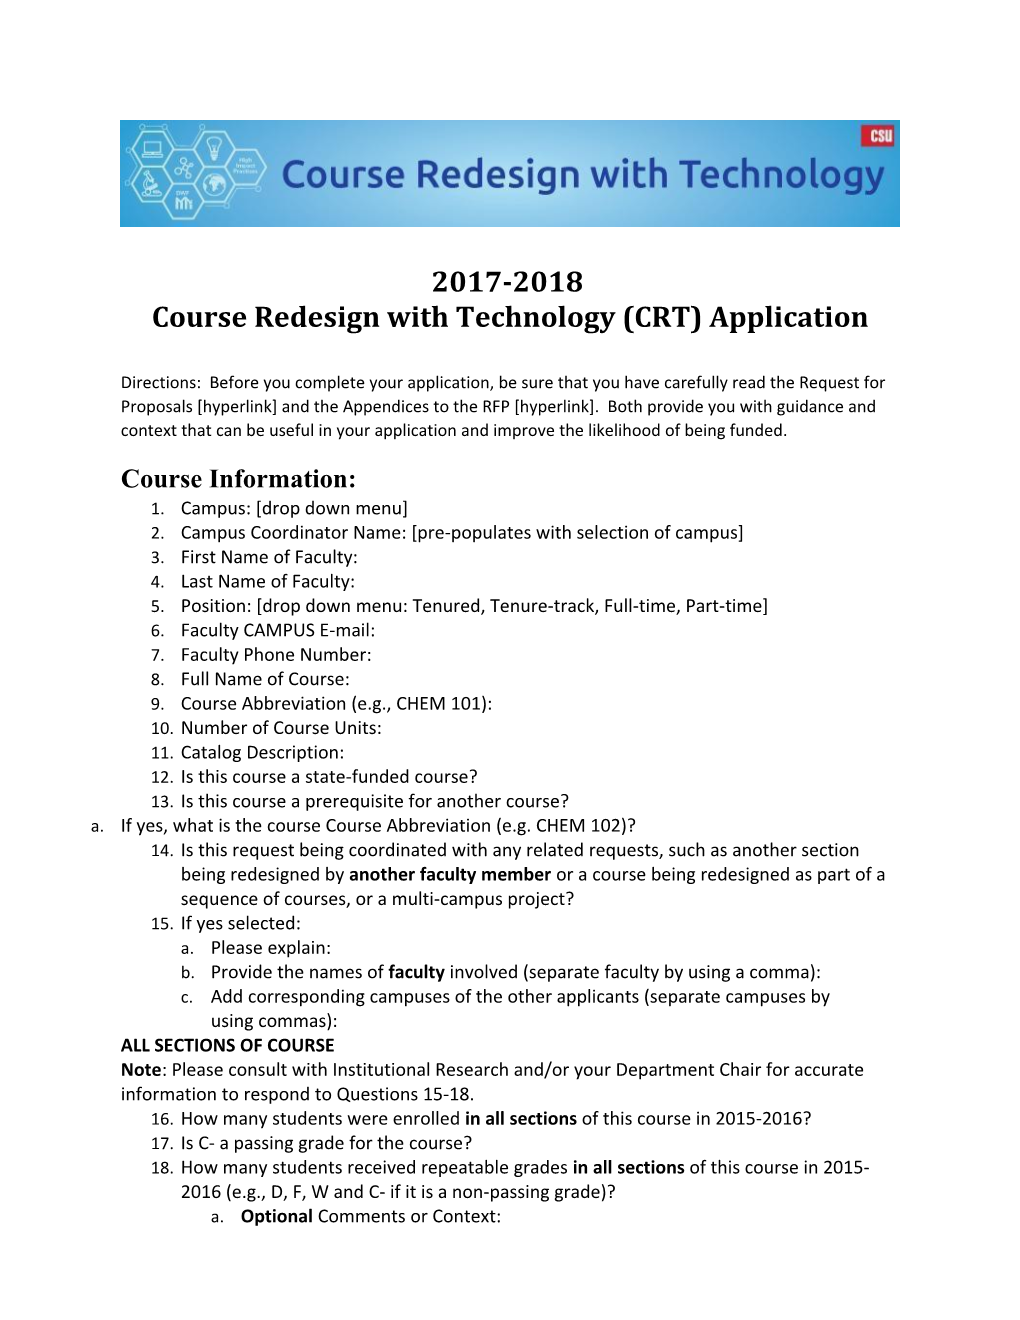 Course Redesign with Technology (CRT) Application